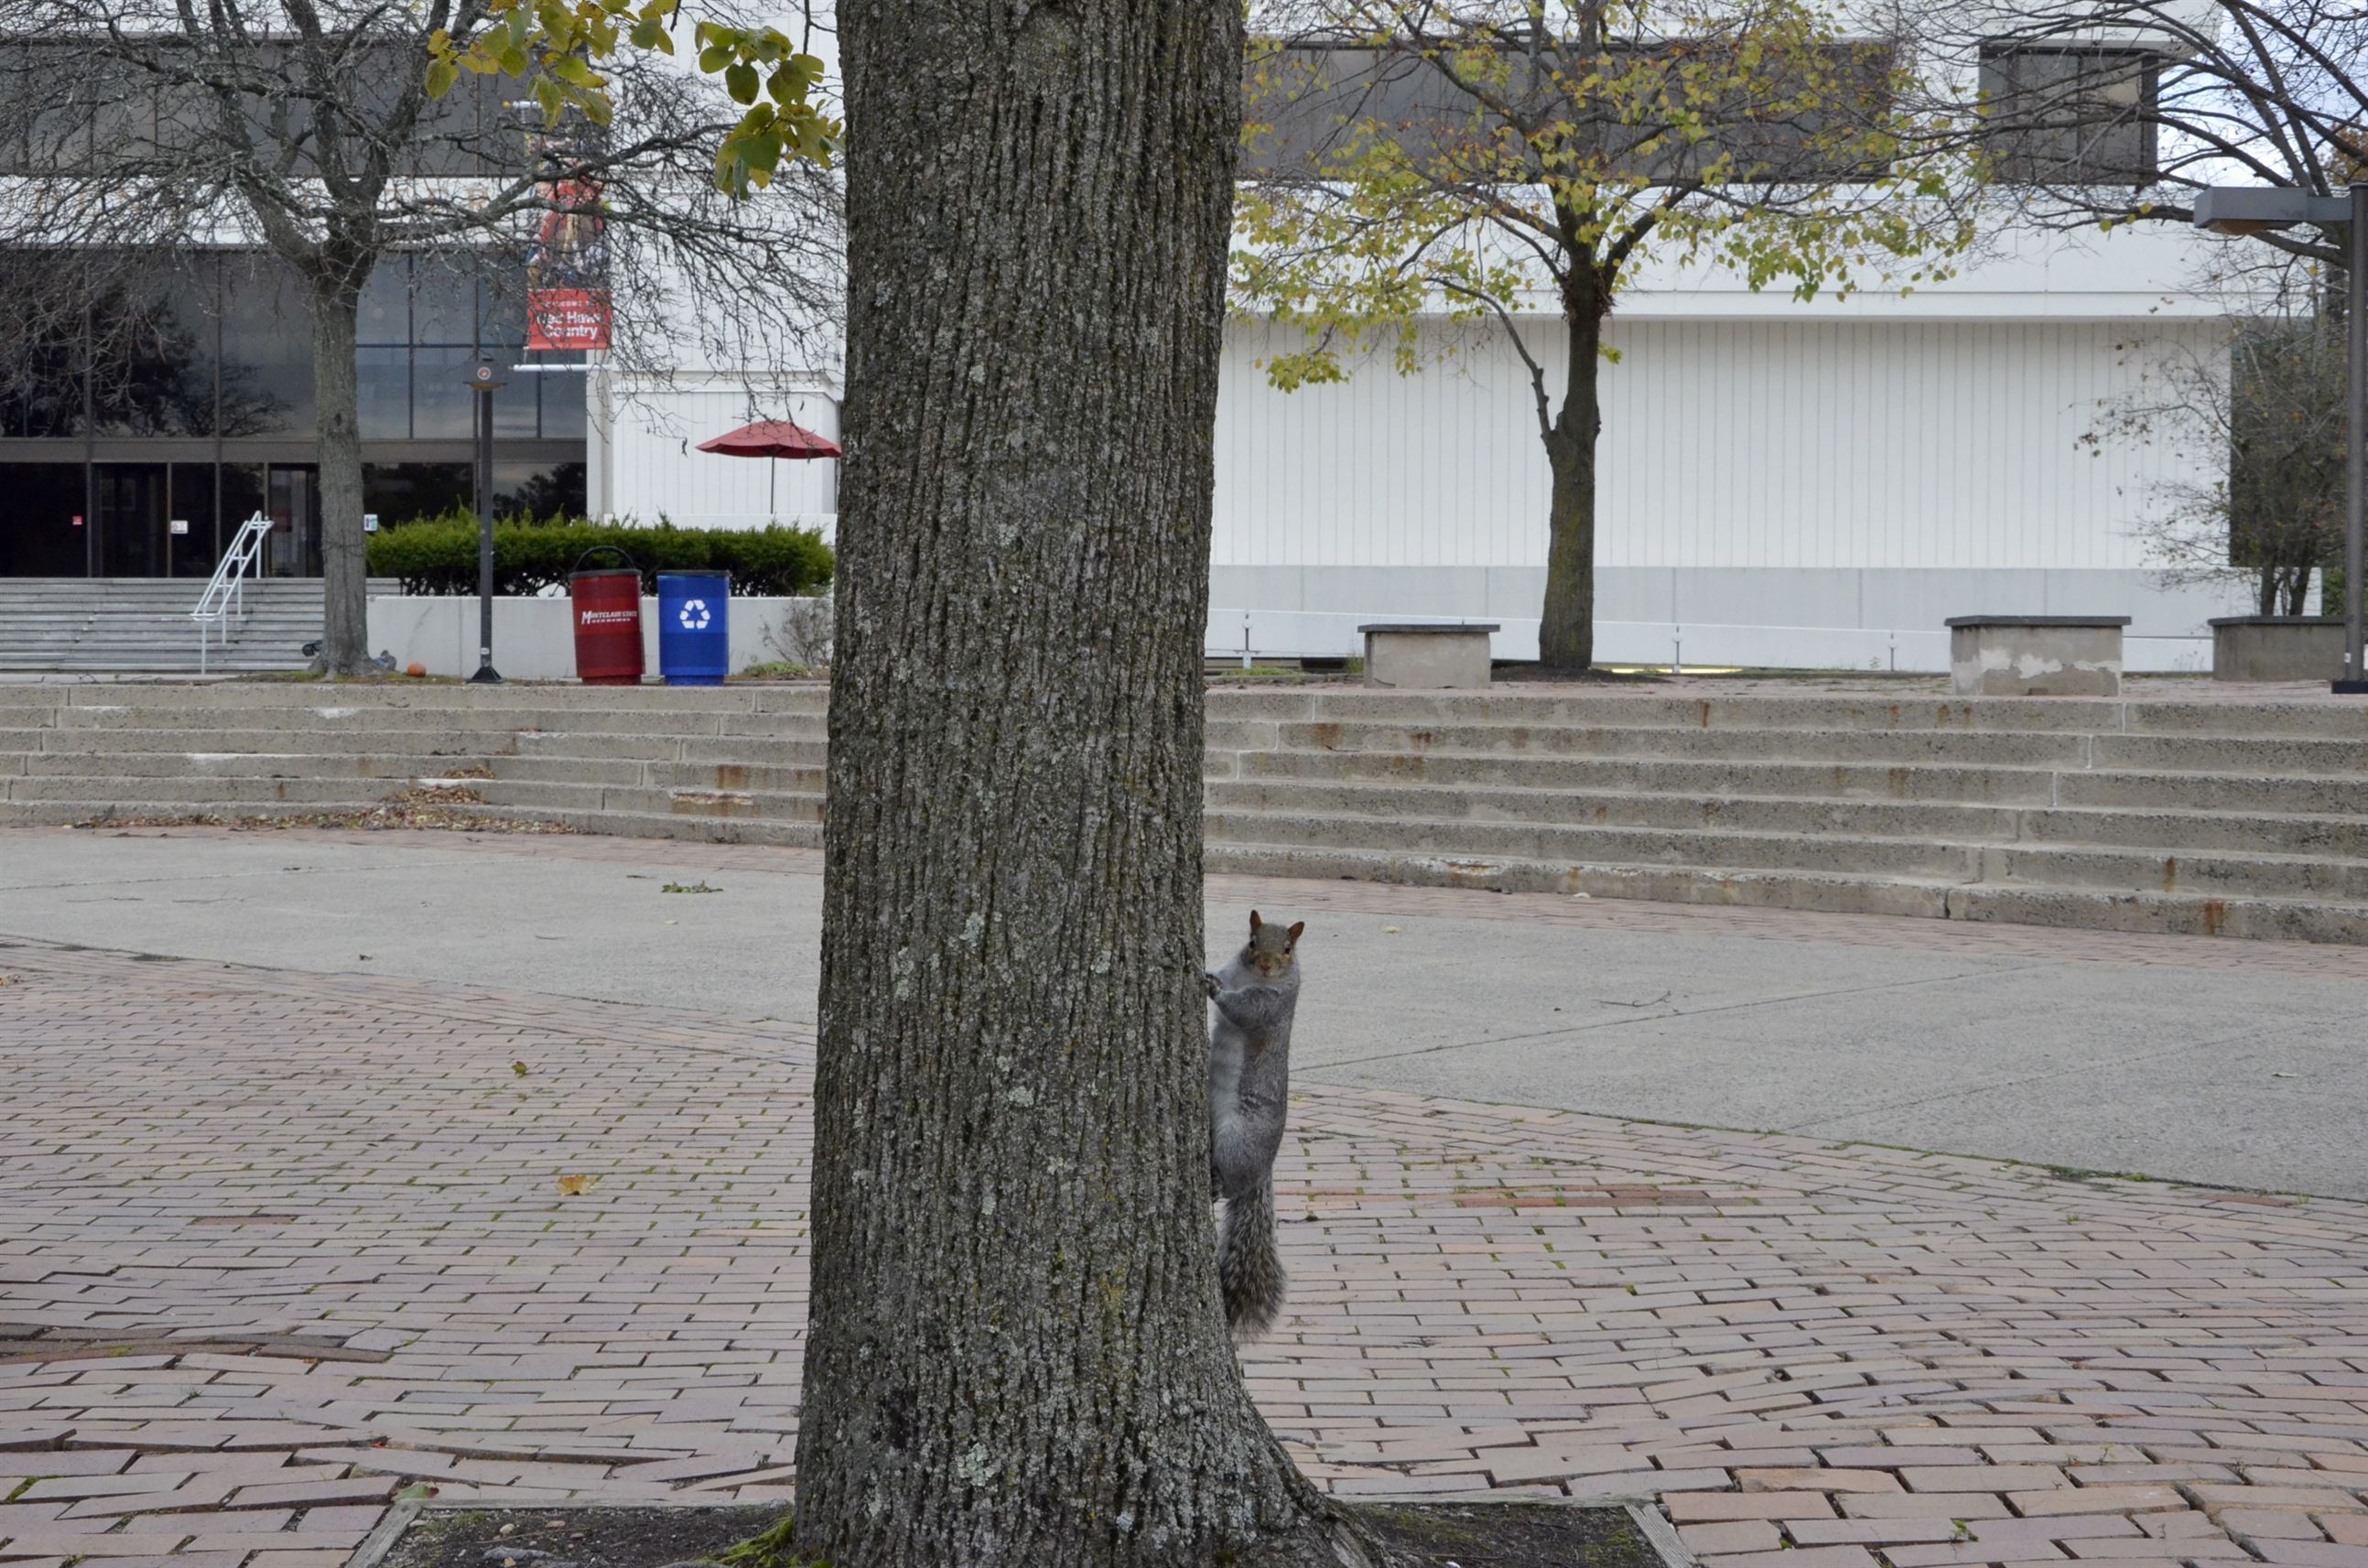 A squirrel outside the Student Center seems to be the only signs of life today. John LaRosa | The Montclarion